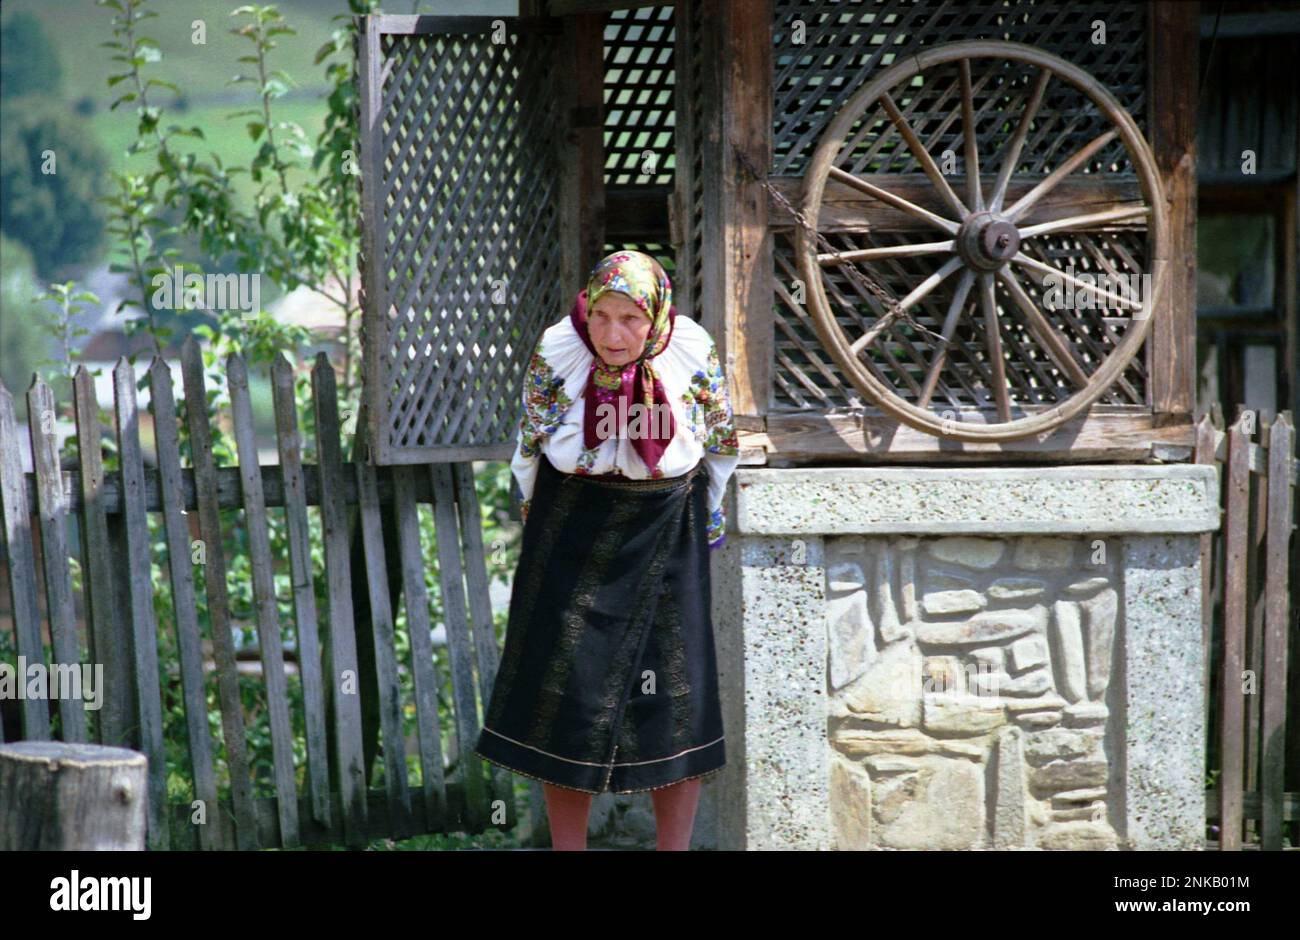 Straja, Suceava County, Romania, 1998. Elderly woman wearing traditional costume near a water well with wheel. Stock Photo